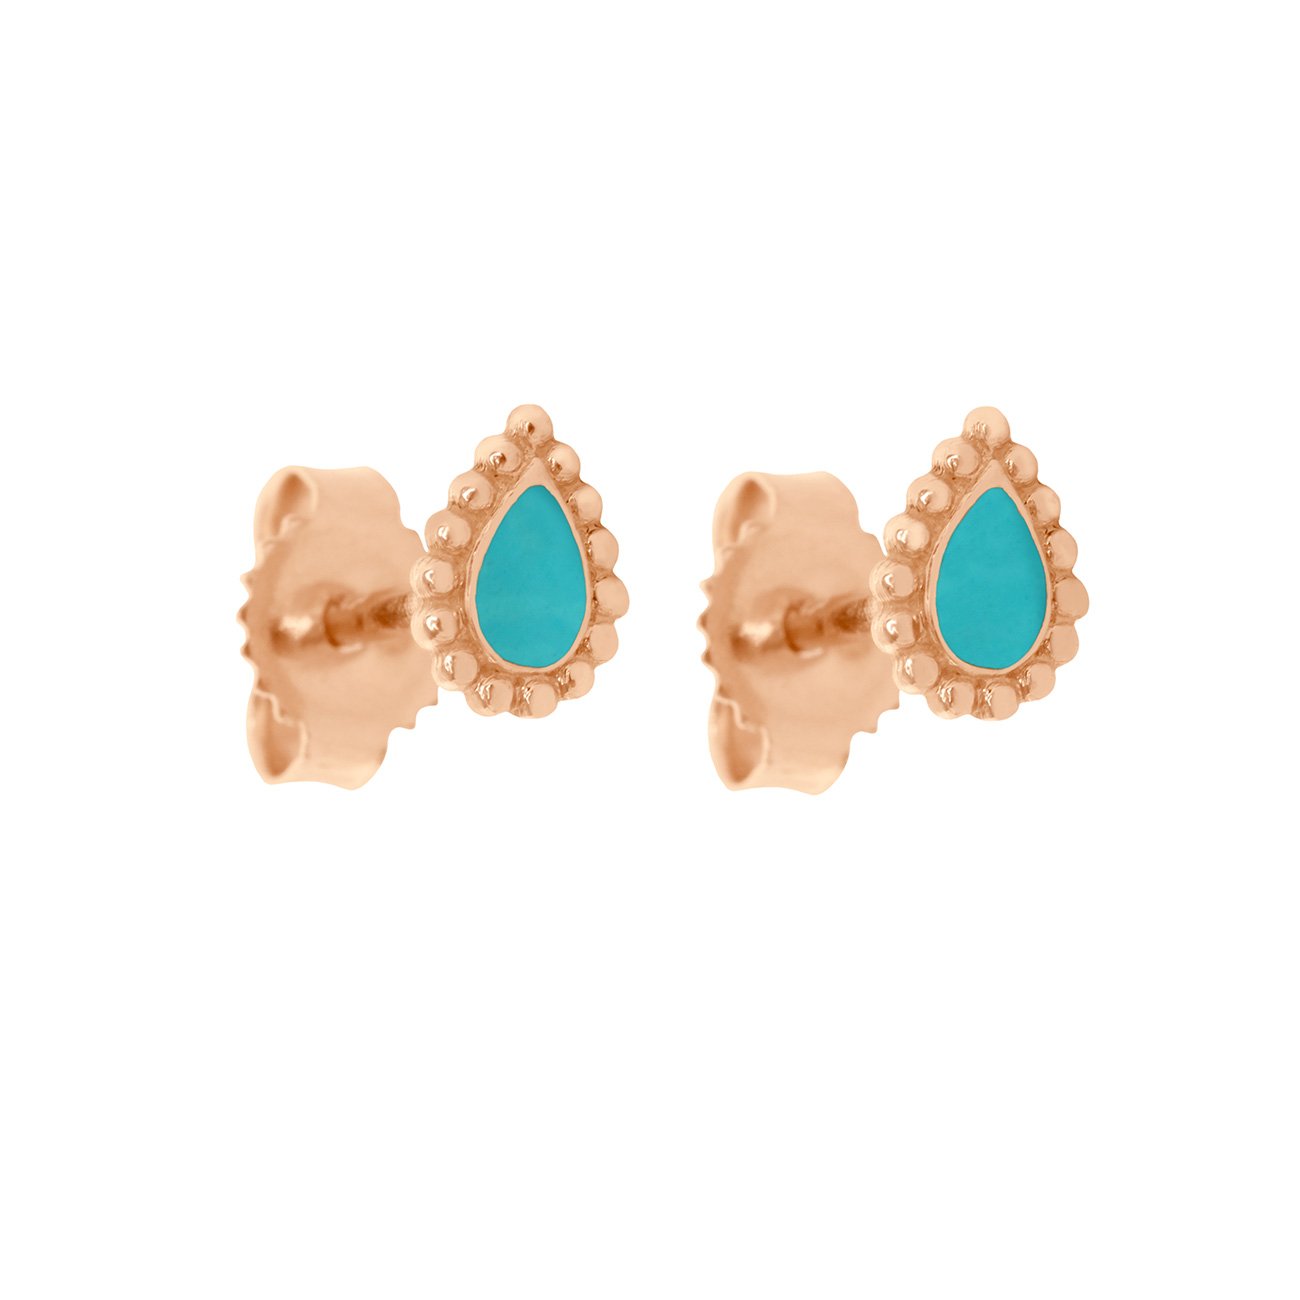 Boucles d'oreilles Lucky Cashmere turquoise vert, or rose